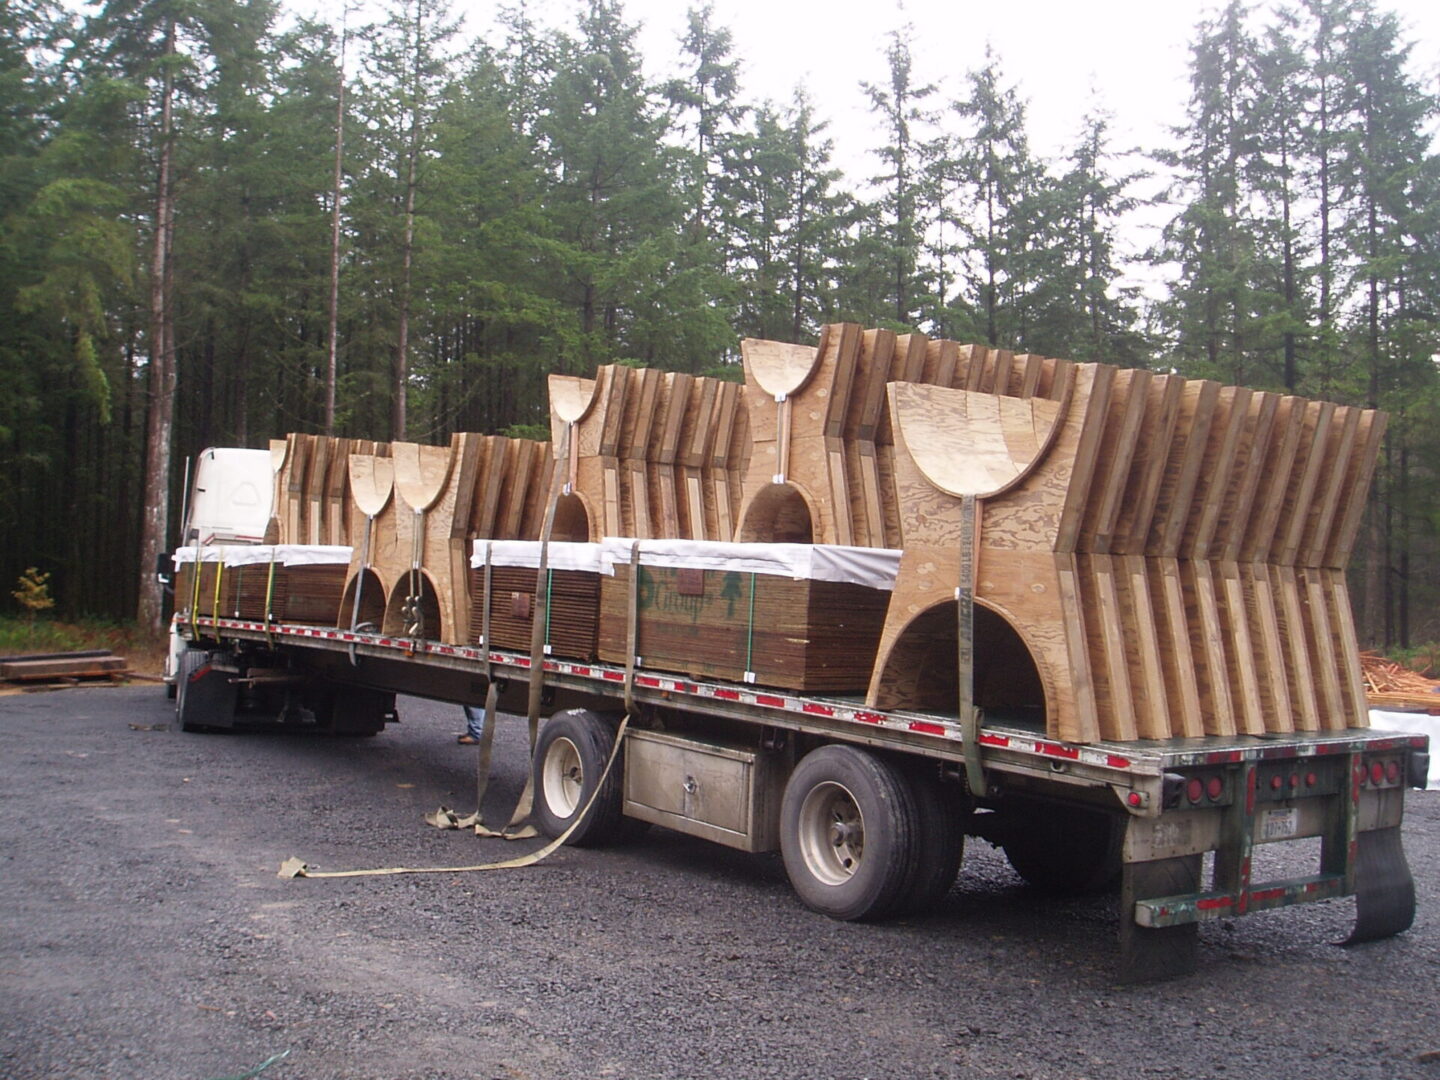 A truck with several wooden structures on it.